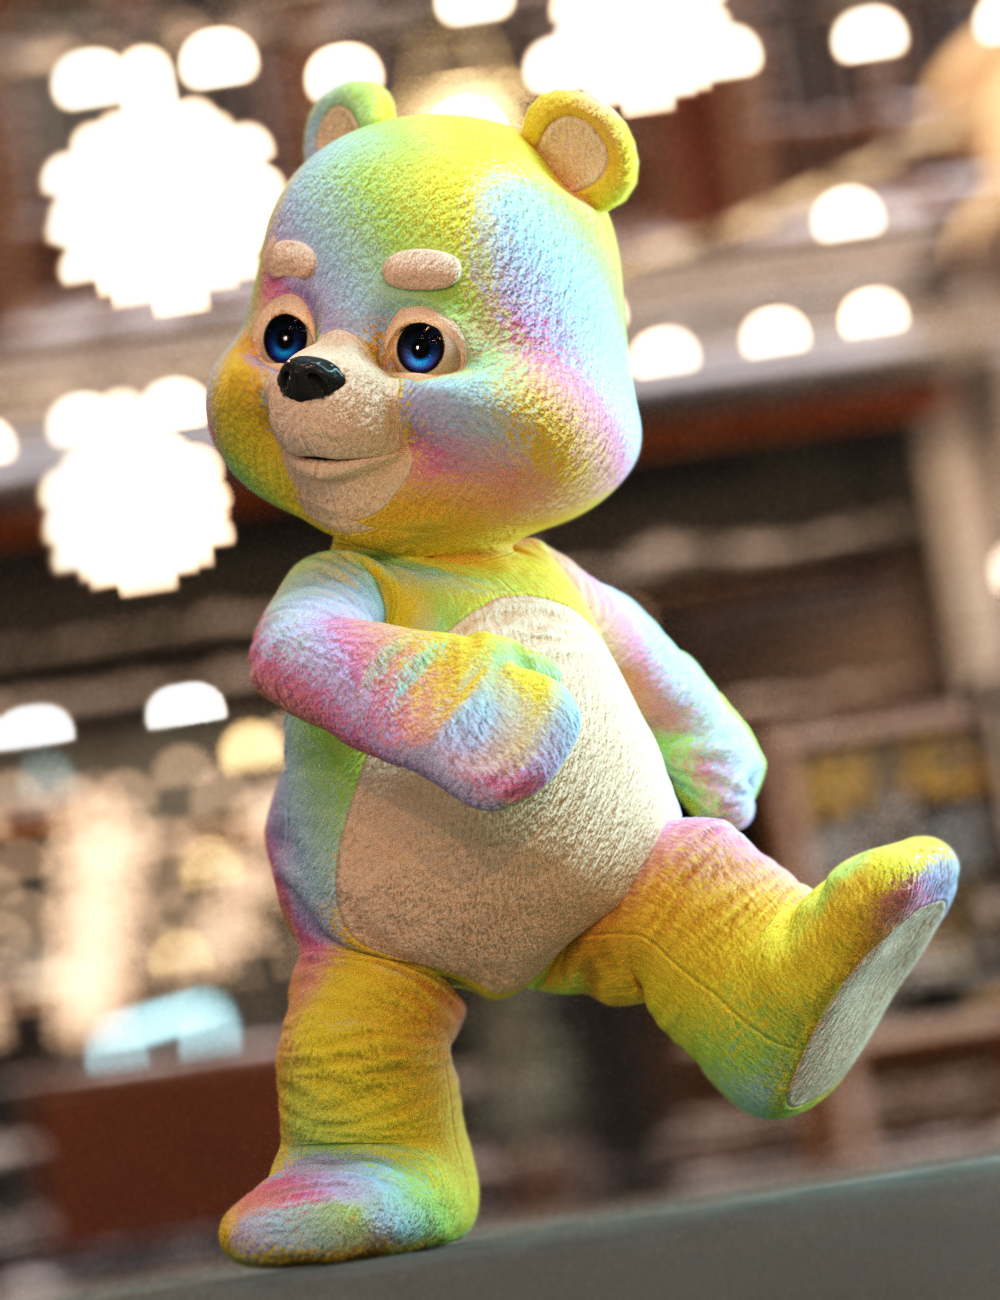 Teddy Bear Poses for Teddy by: Ensary, 3D Models by Daz 3D